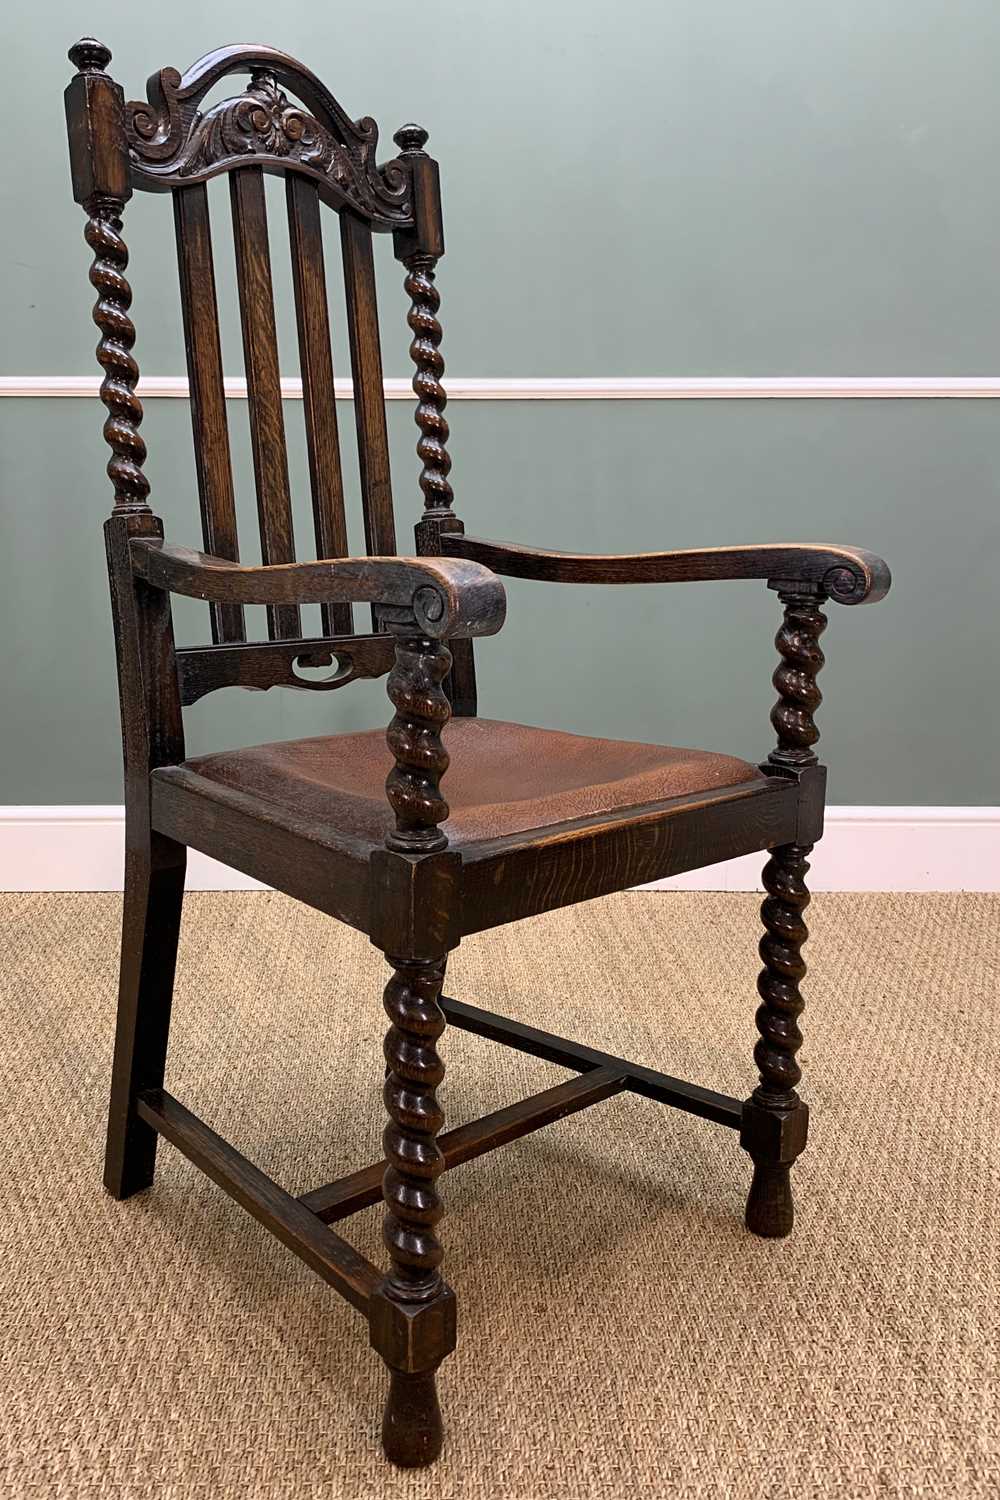 COLLECTION OF ANTIQUE CHAIRS including, mahogany horseshoe chair, oak ladderback, Jacobean style oak - Image 5 of 8